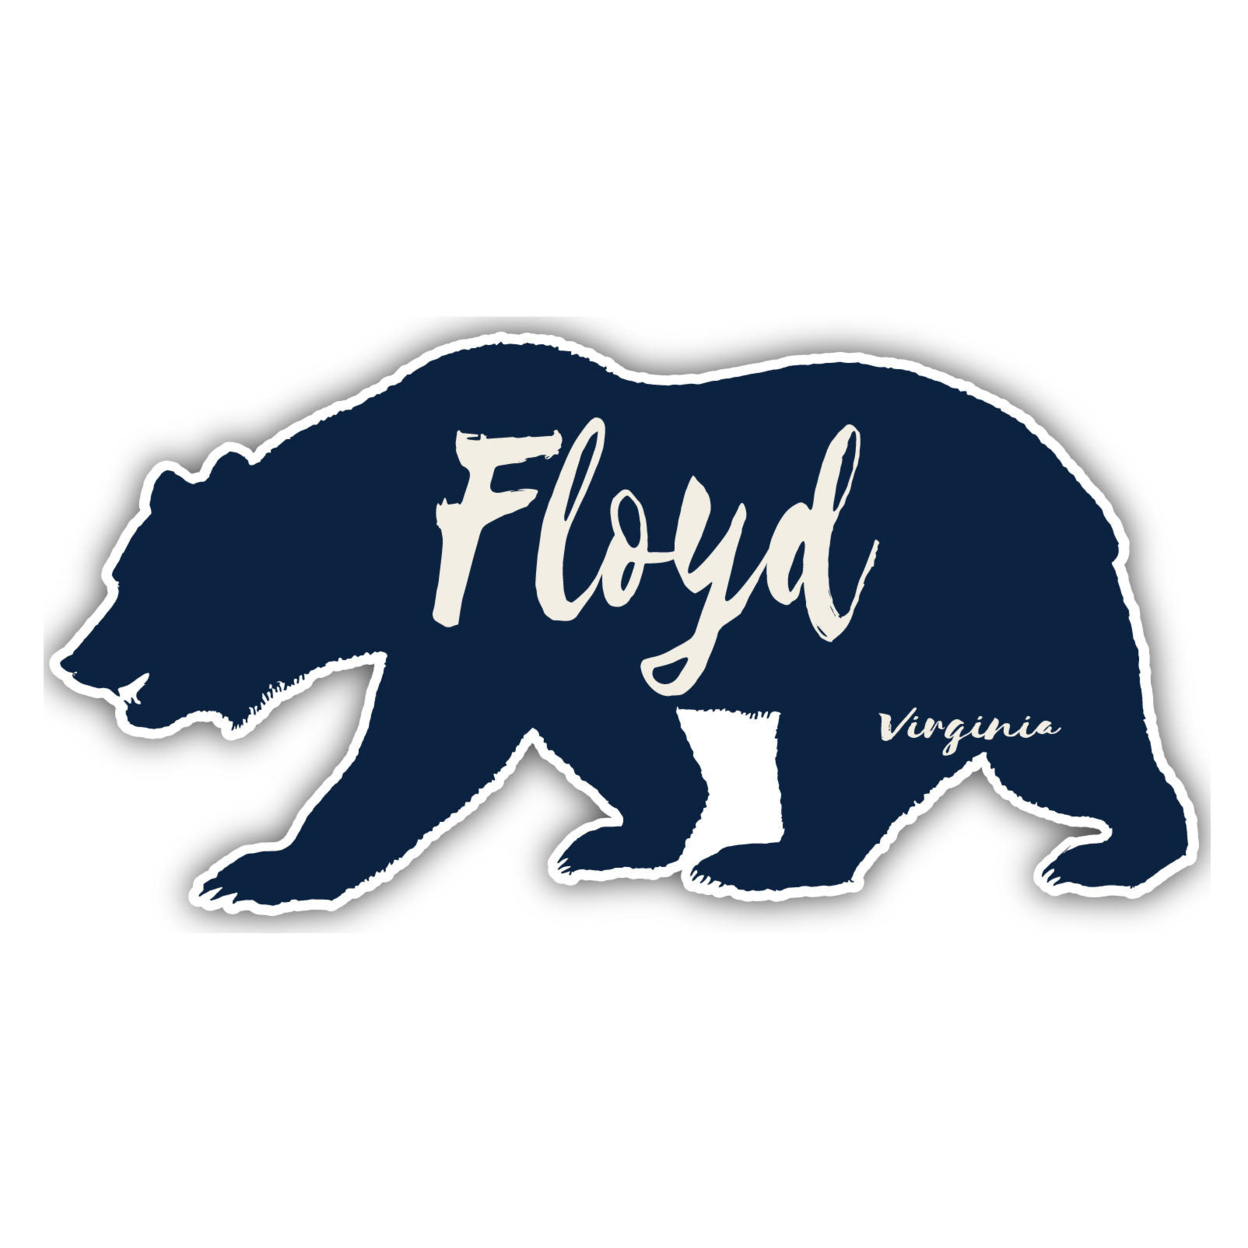 Floyd Virginia Souvenir Decorative Stickers (Choose Theme And Size) - 4-Pack, 10-Inch, Bear